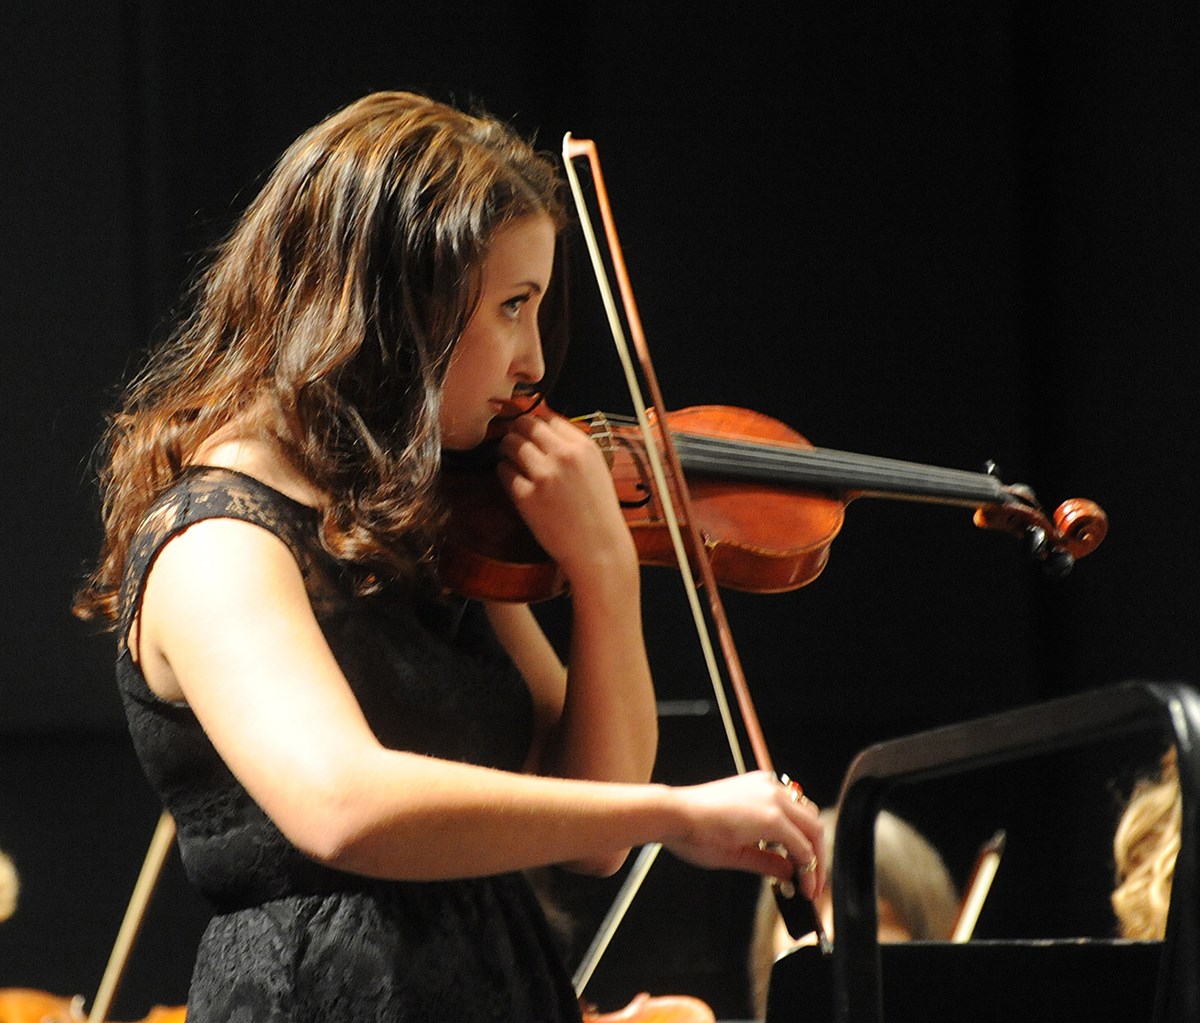 A violinist performs at the University Orchestra's "All You Need is Love!” Valentine's Day concert.